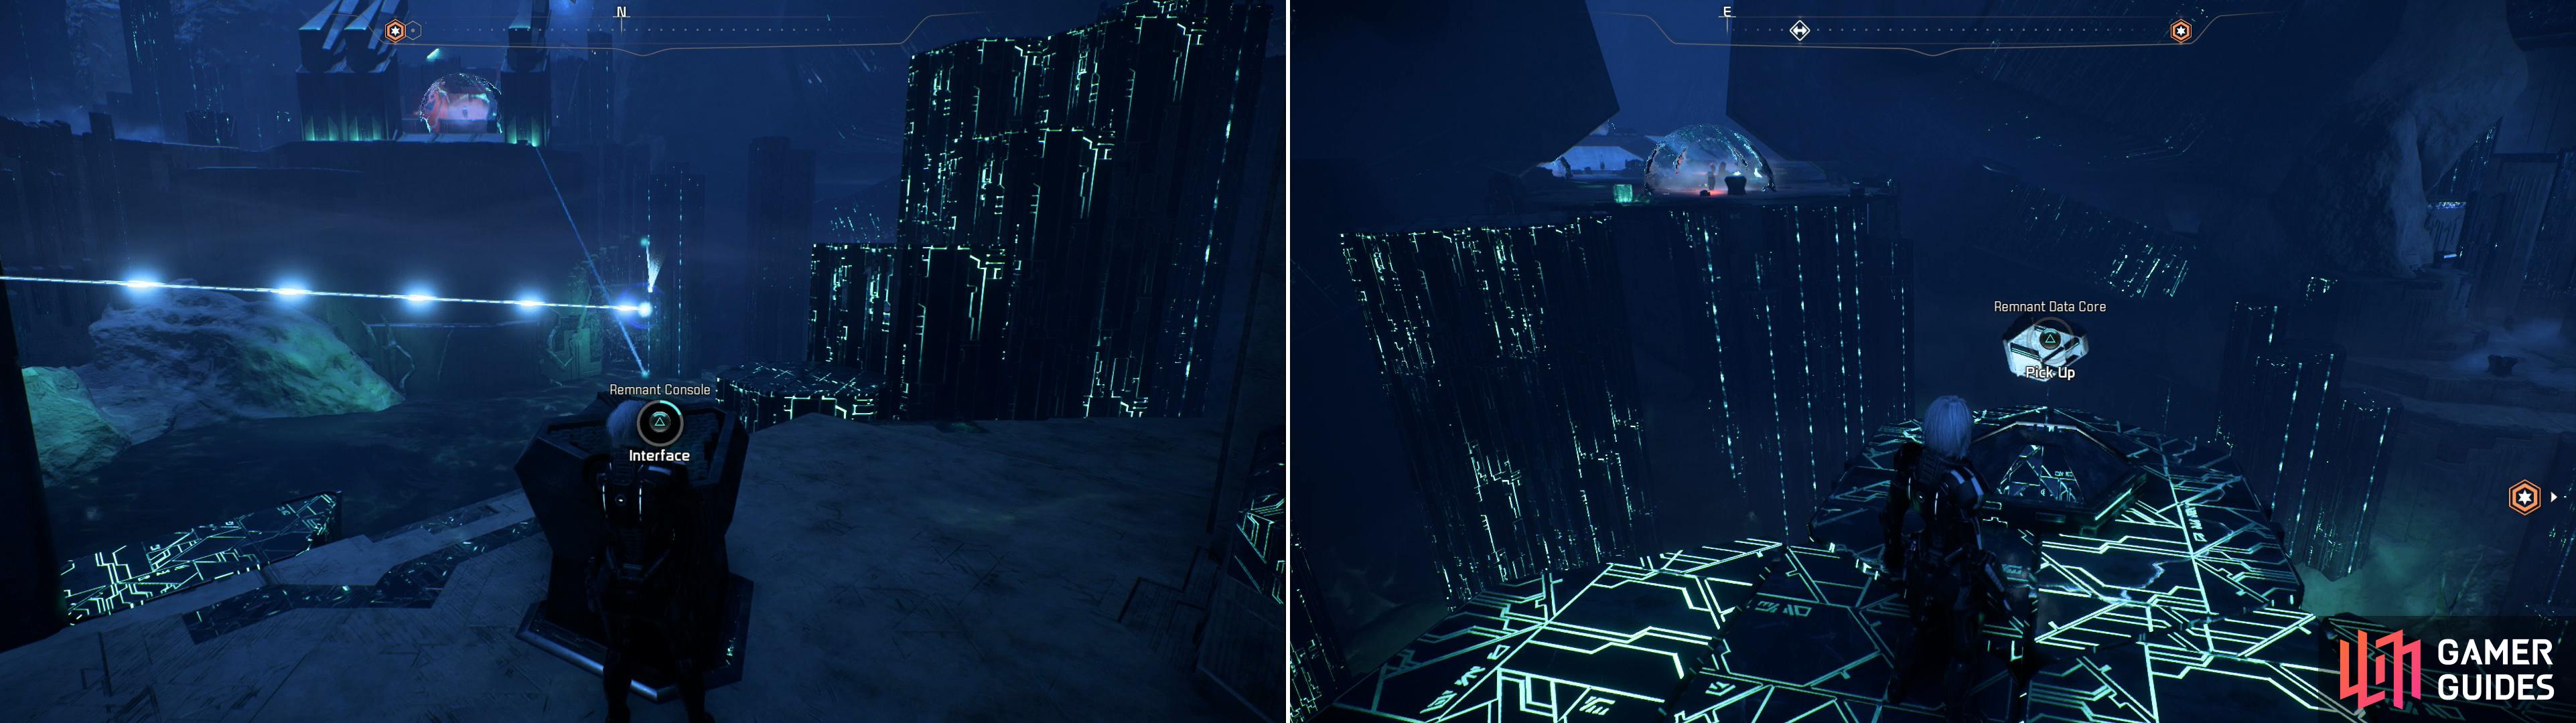 Activate a series of Remnant Consoles to raise a distant platform (left) upon which youll find a Remnant Data Core (right).